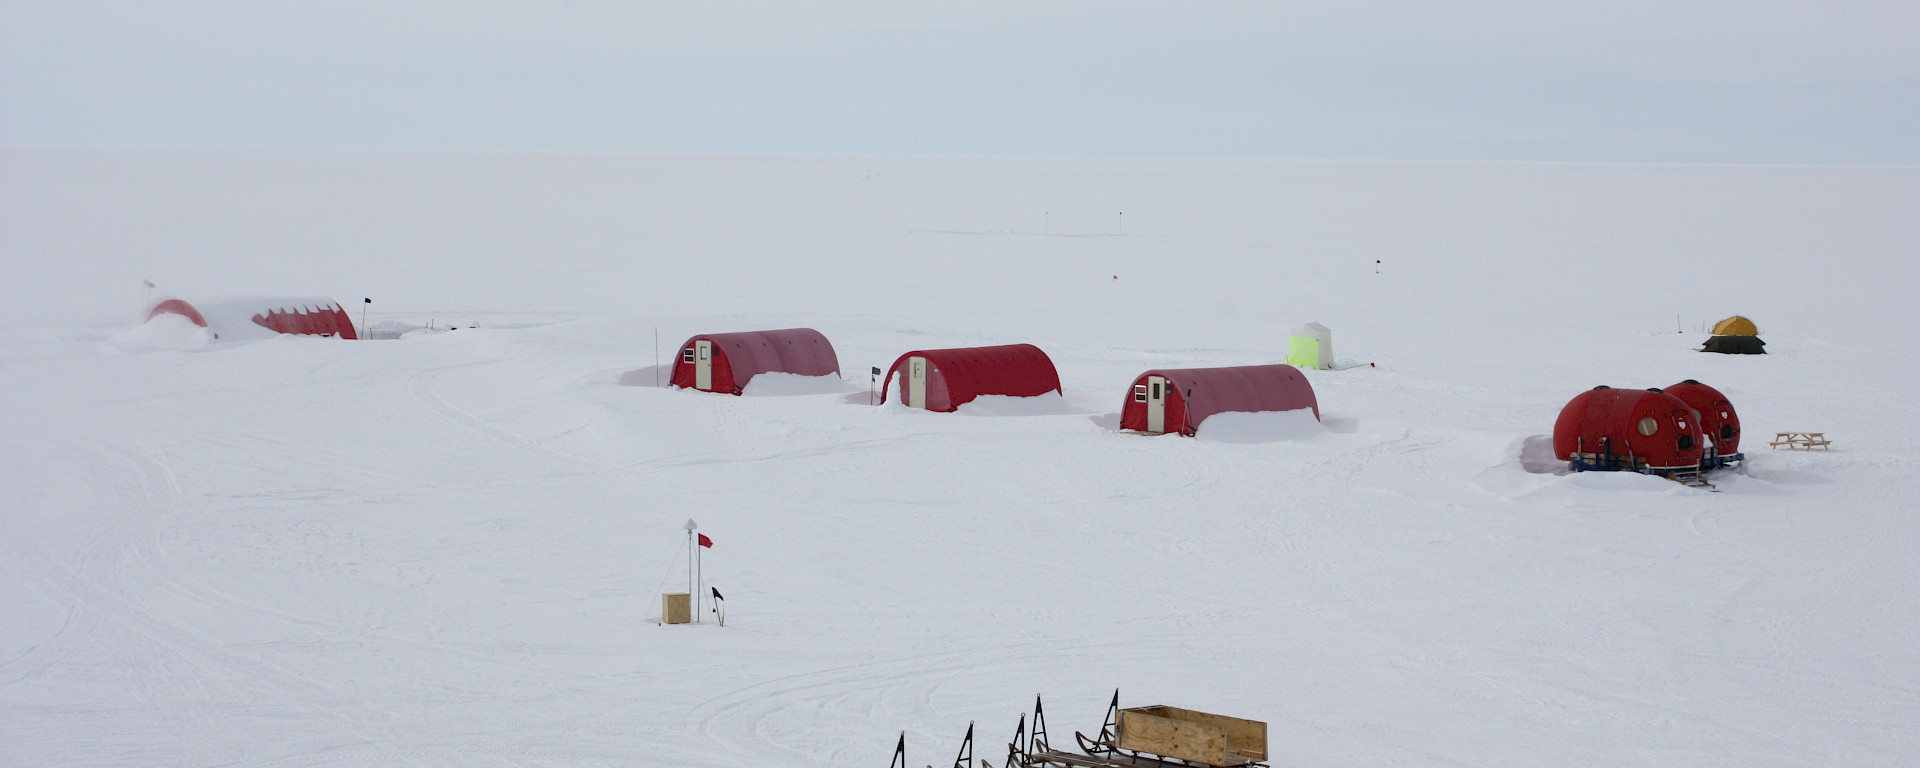 Some of the accommodation tents at the field camp (Photo: Andrew Moy)